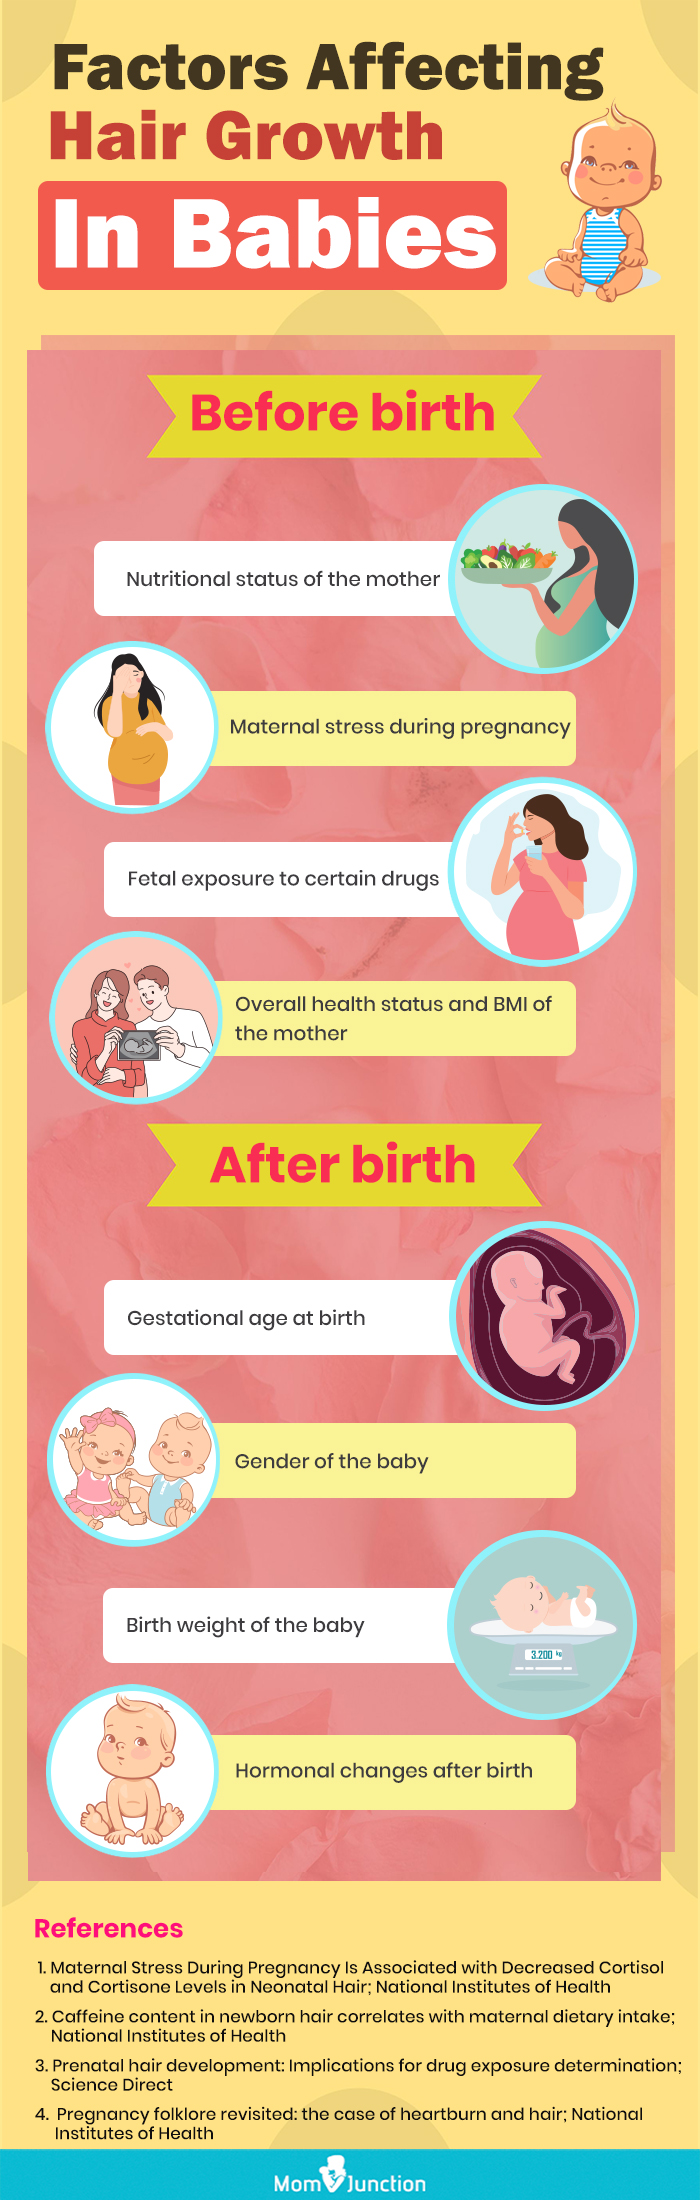 factors affecting hair growth in babies (infographic)